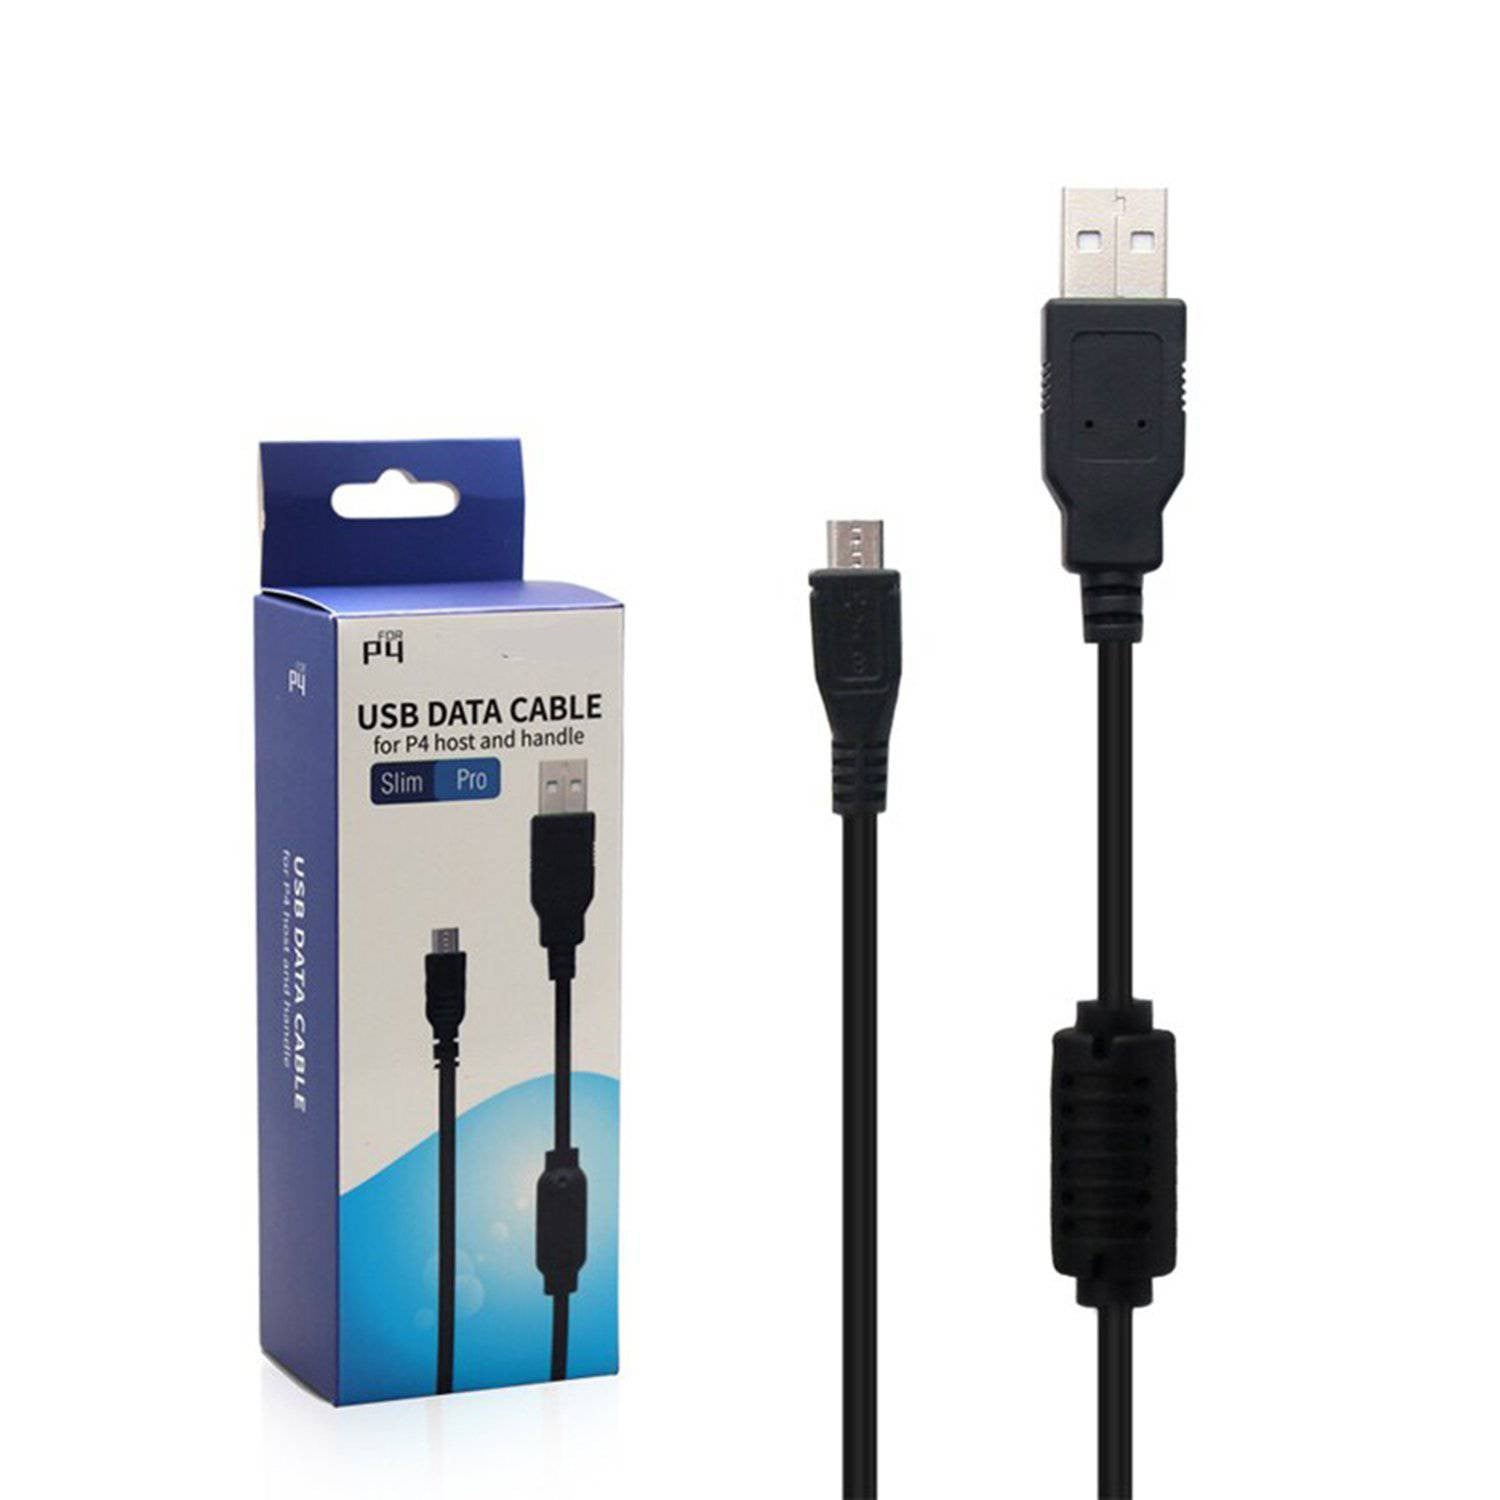 3 meter micro USB cables | Shopna Online Store .